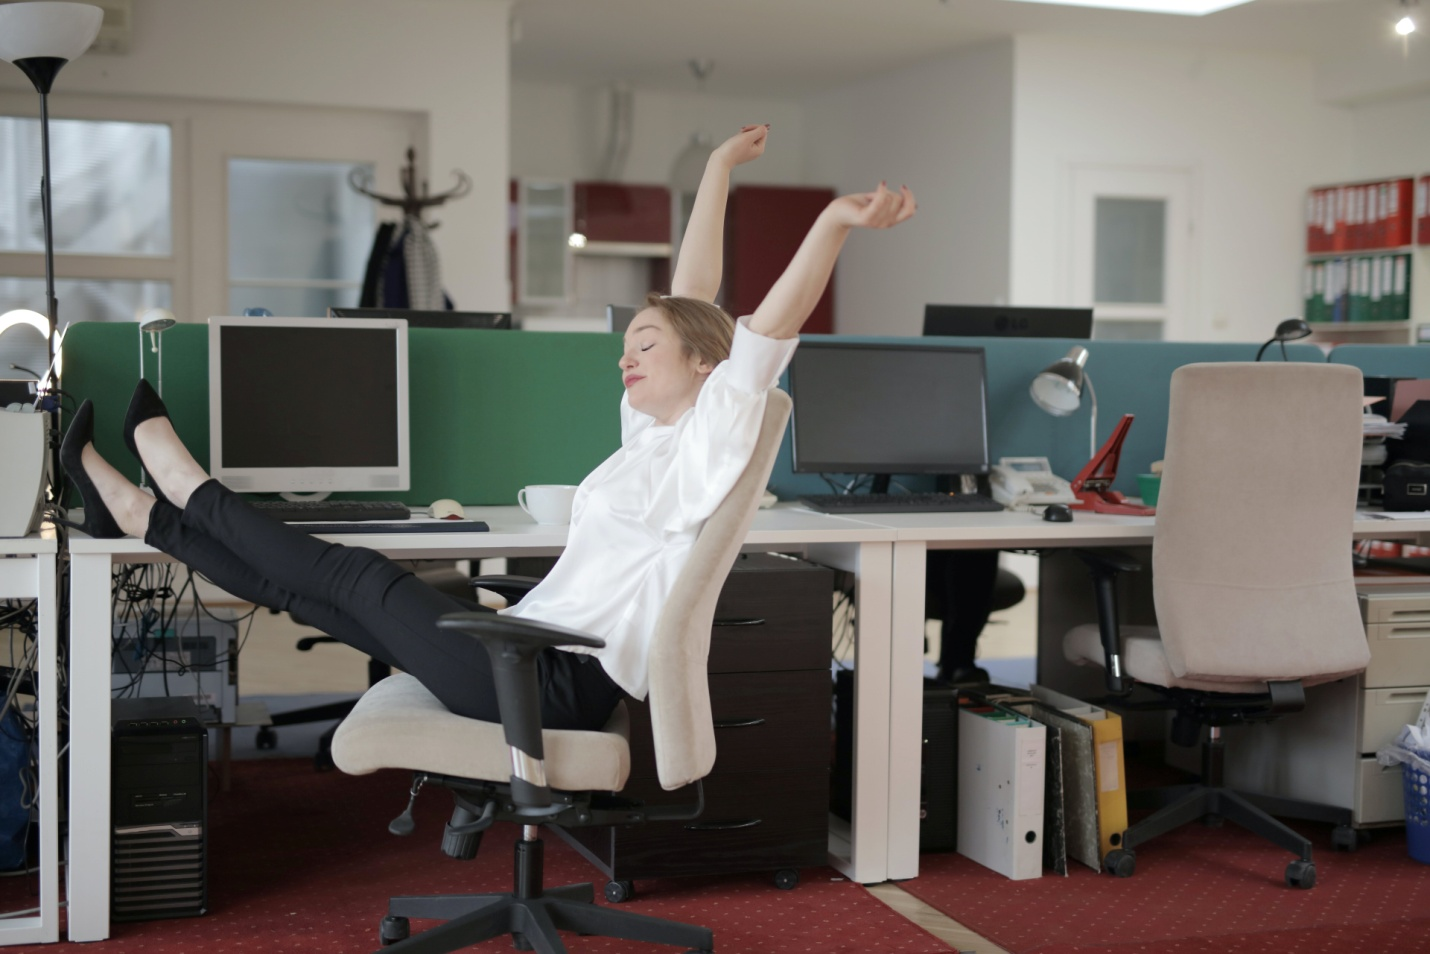 A woman stretching at work